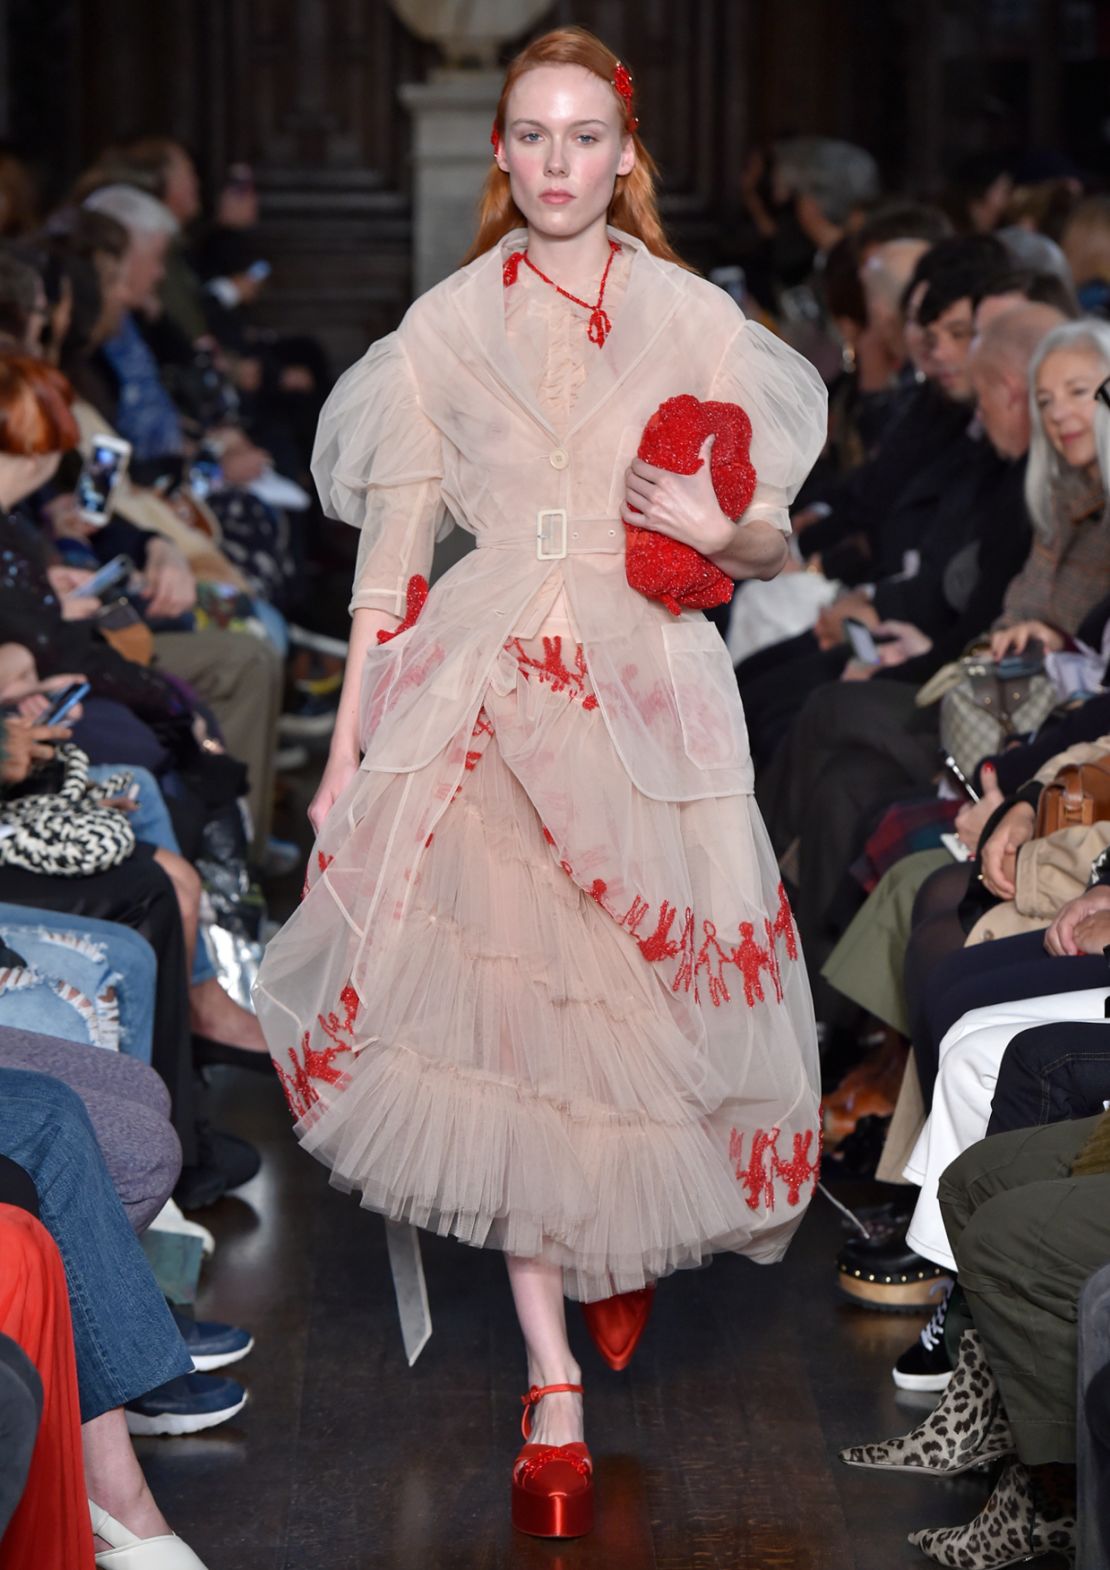 A look from a previous Simone Rocha own label collection.